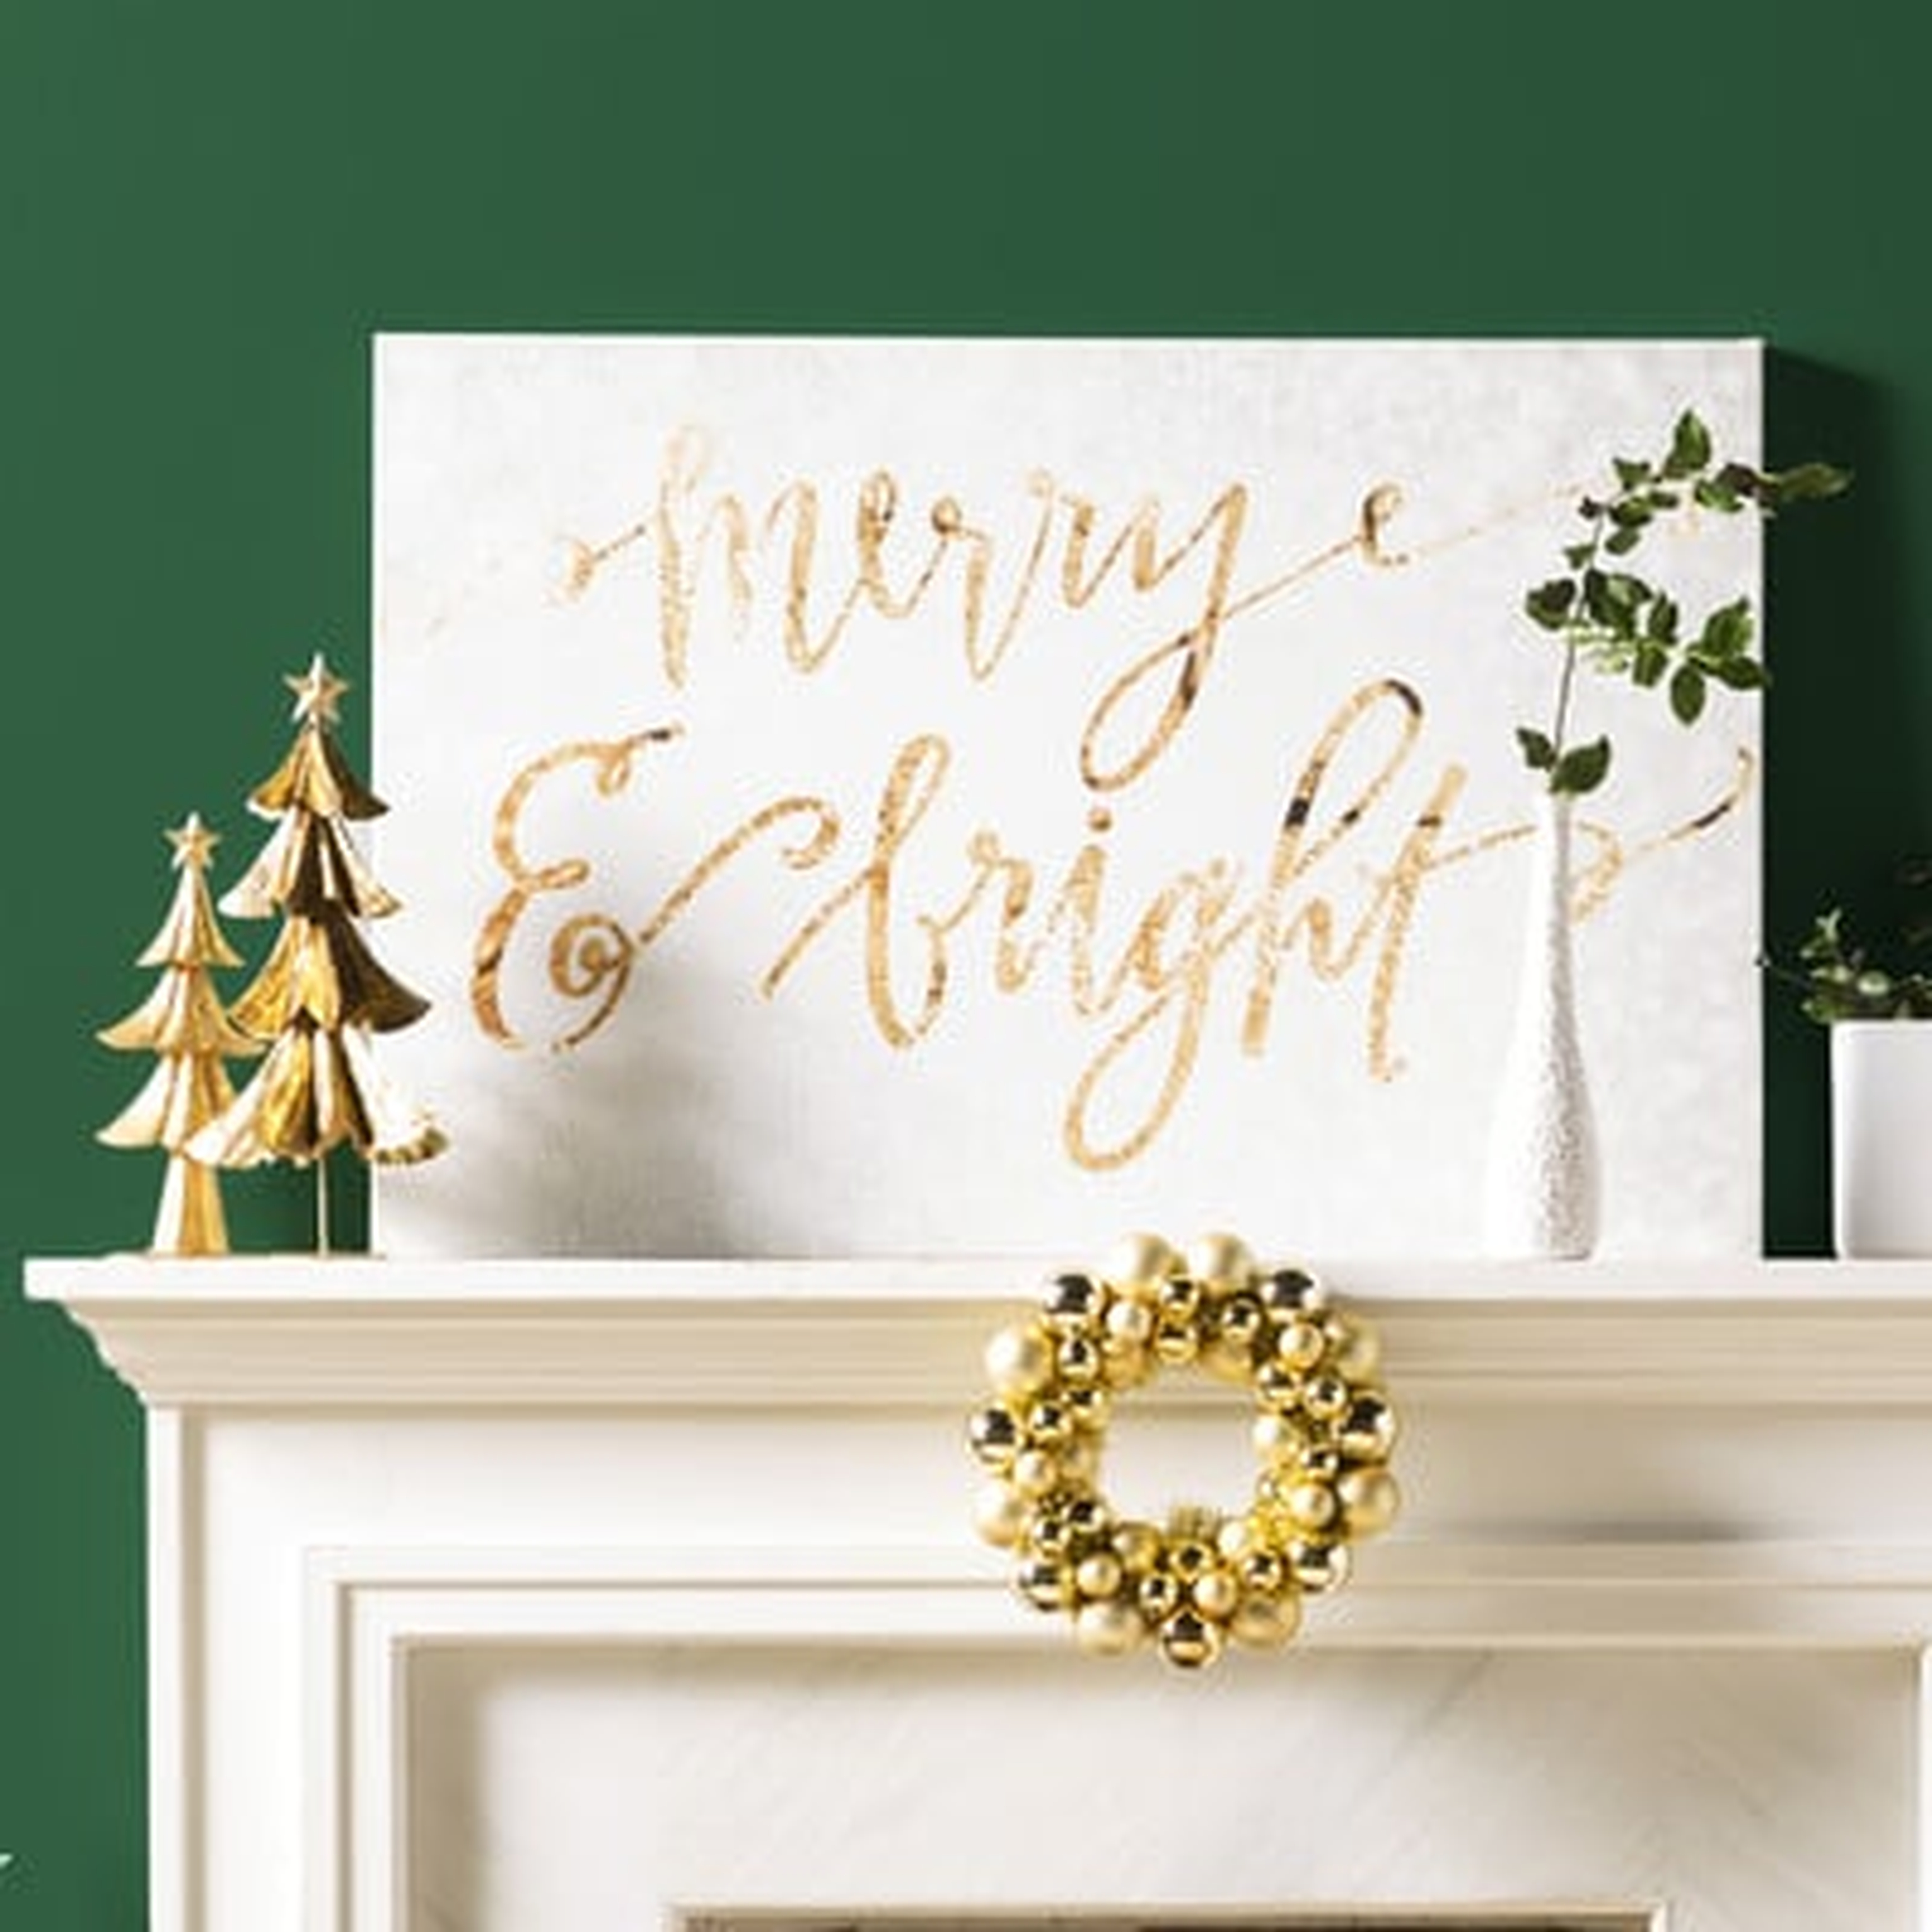 Merry & Bright Textual Art on Wrapped Canvas - Wayfair